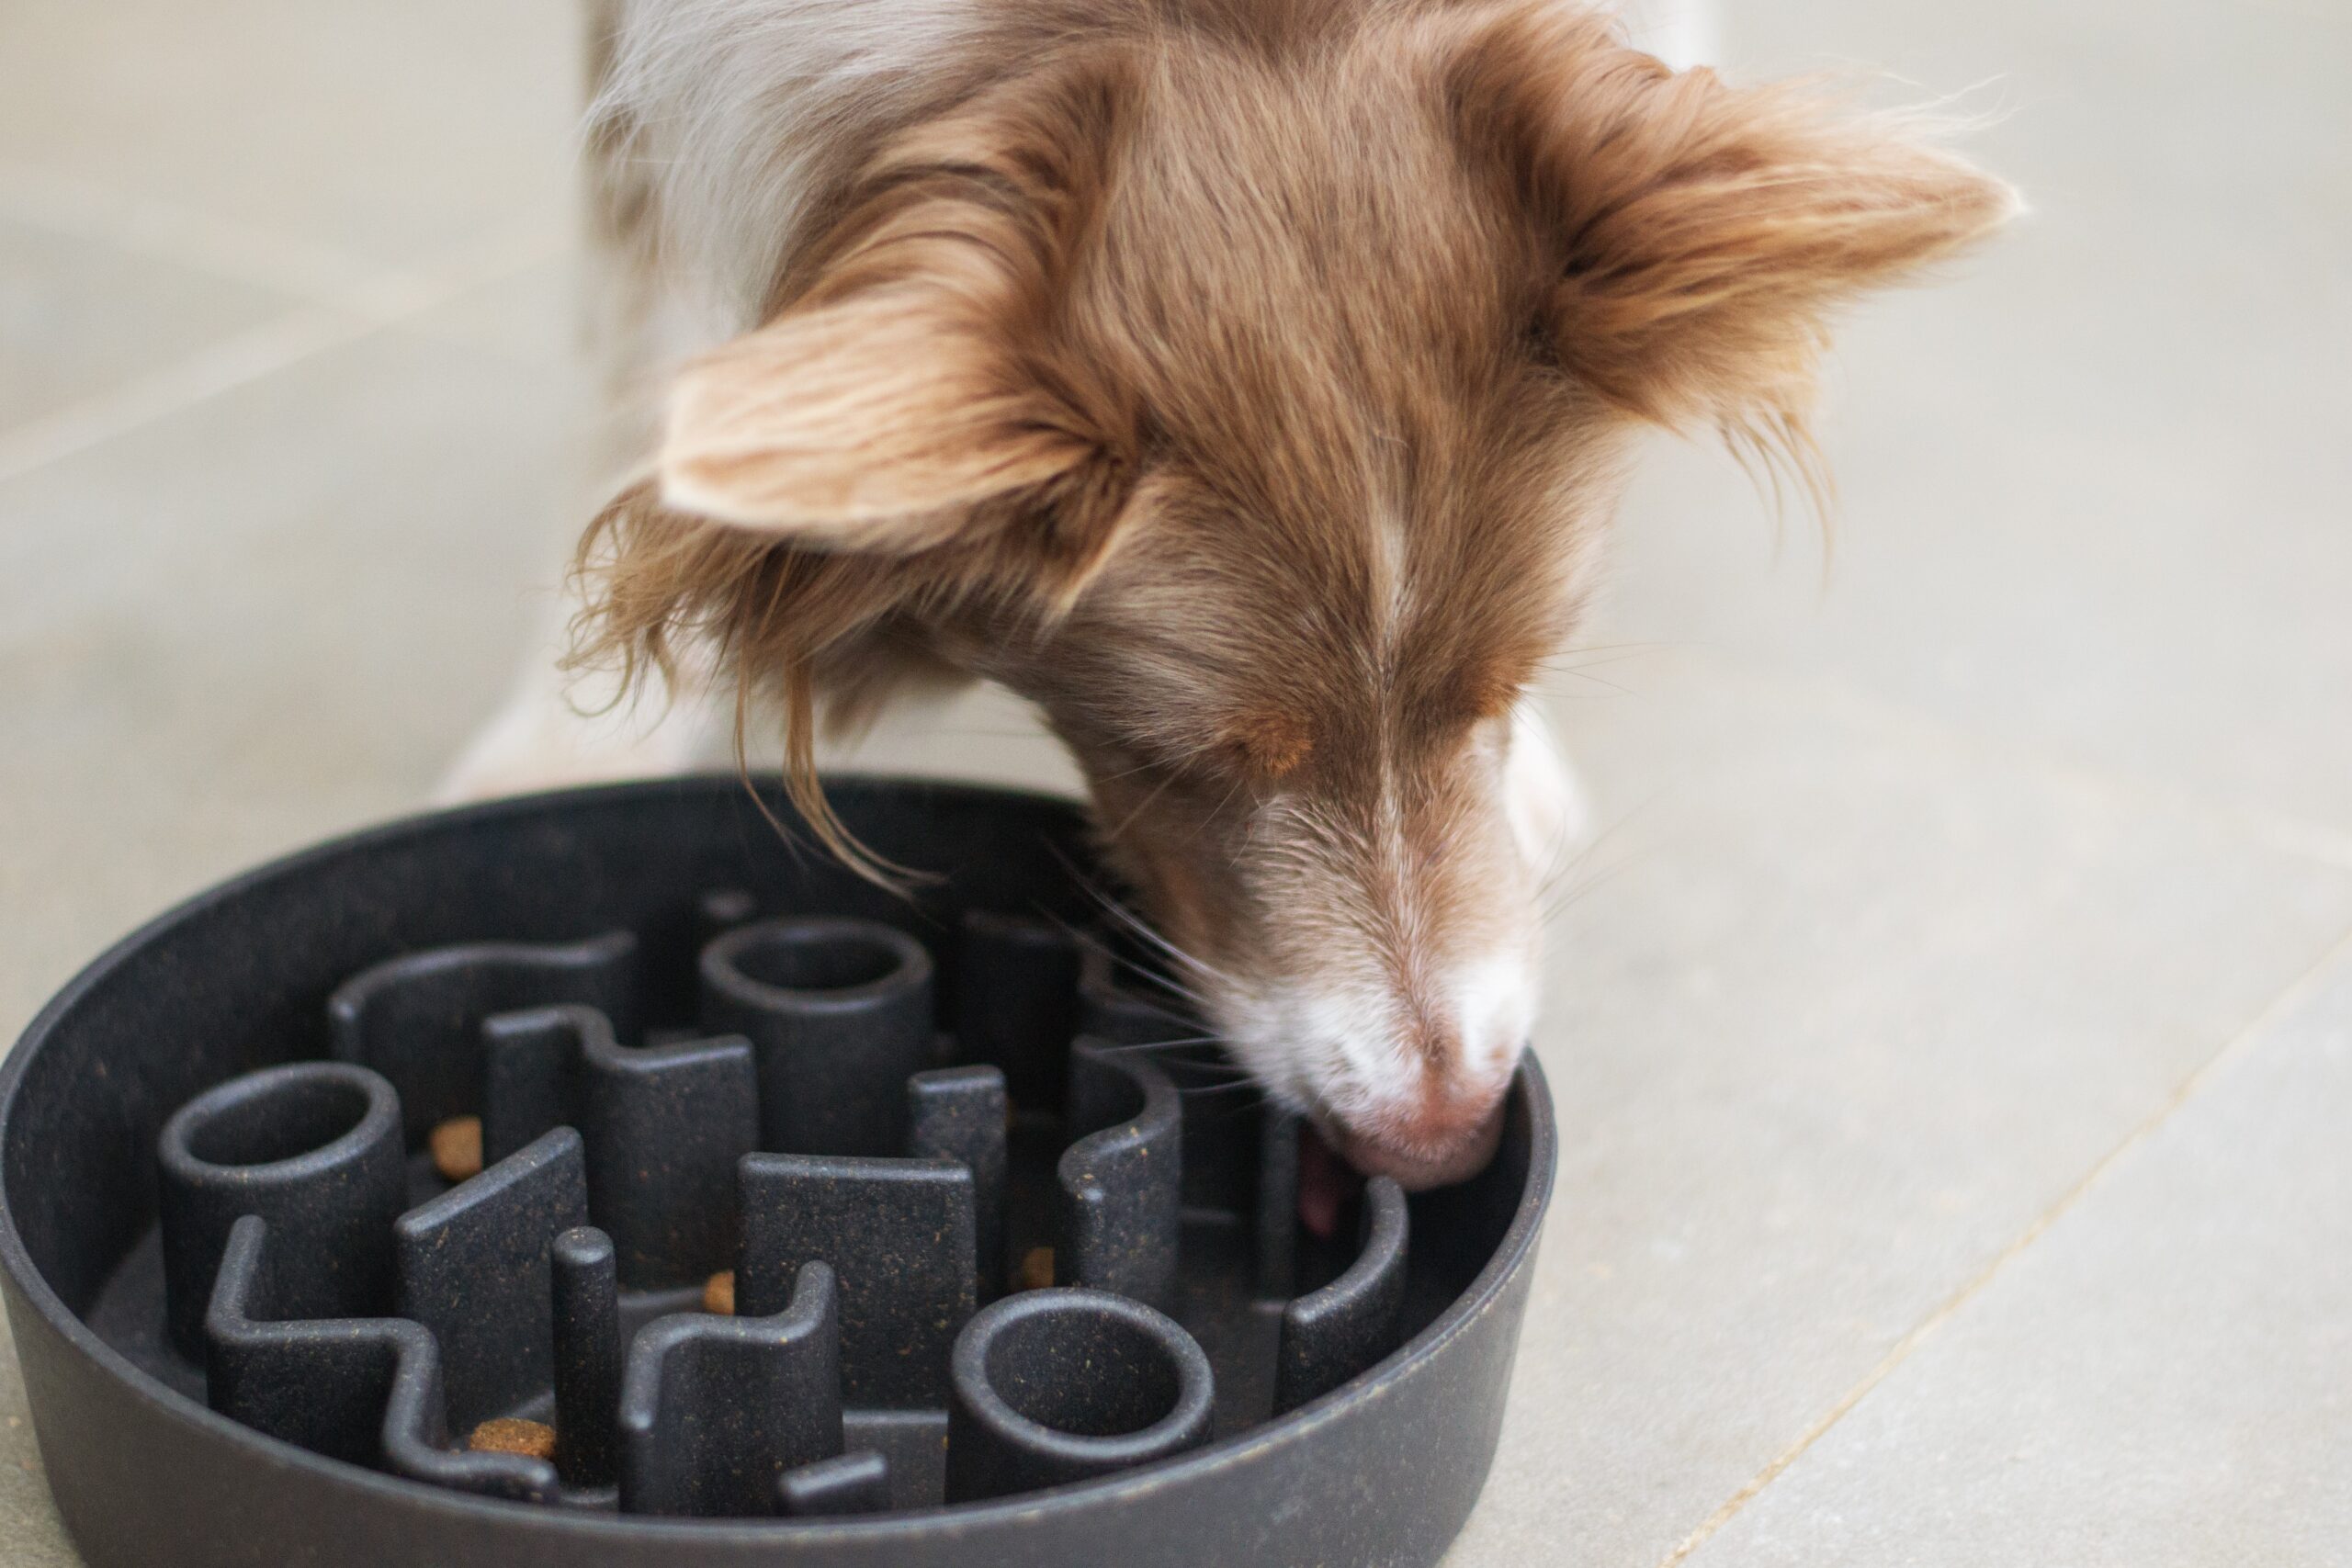 9 things you need to know before buying a slow feeder dog bowl